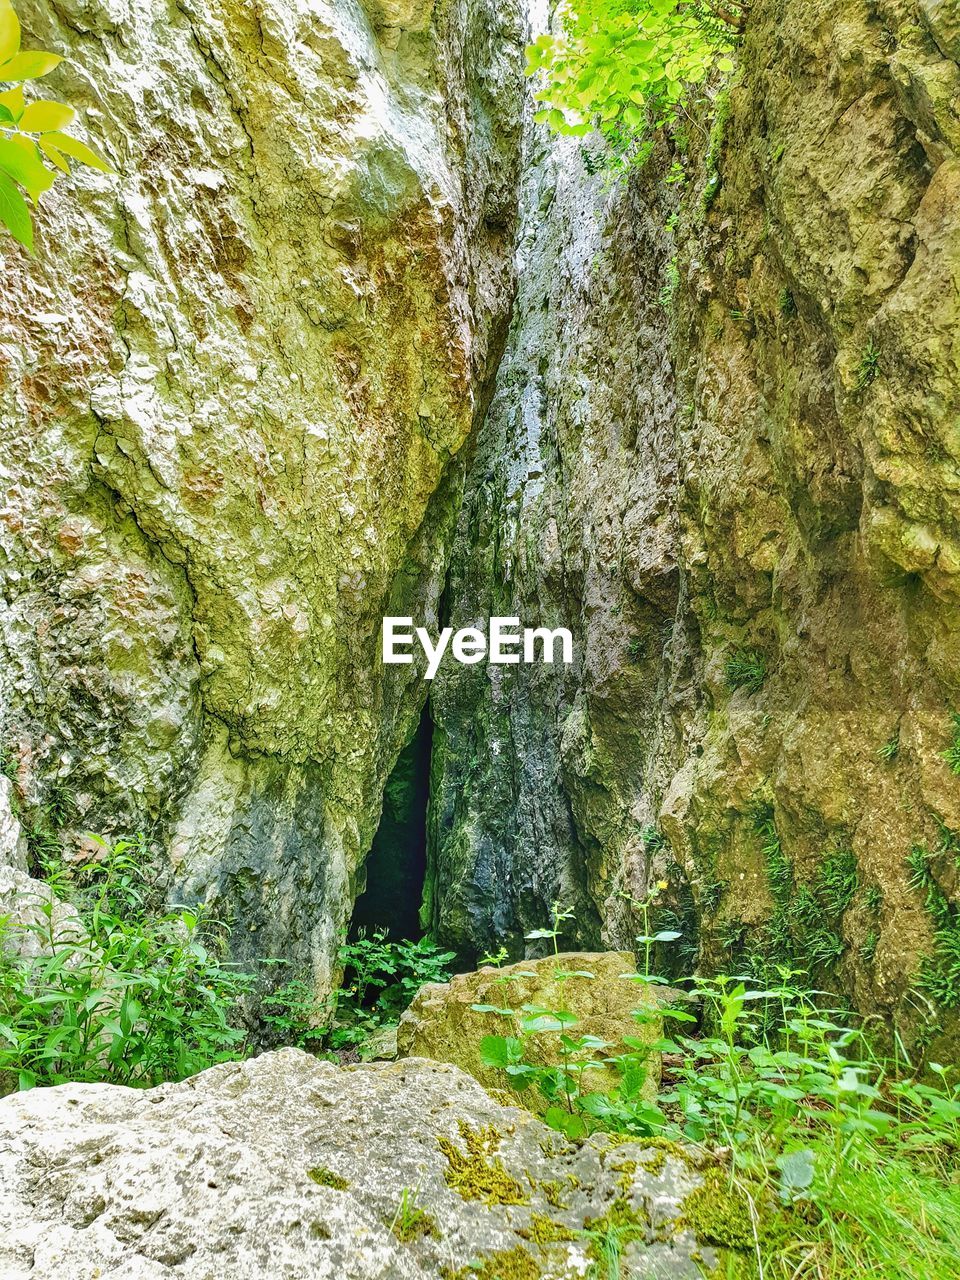 plant, nature, beauty in nature, rock, green, tree, no people, day, growth, land, tranquility, ravine, forest, scenics - nature, outdoors, moss, non-urban scene, woodland, tranquil scene, rock formation, stream, cave, water, sunlight, formation